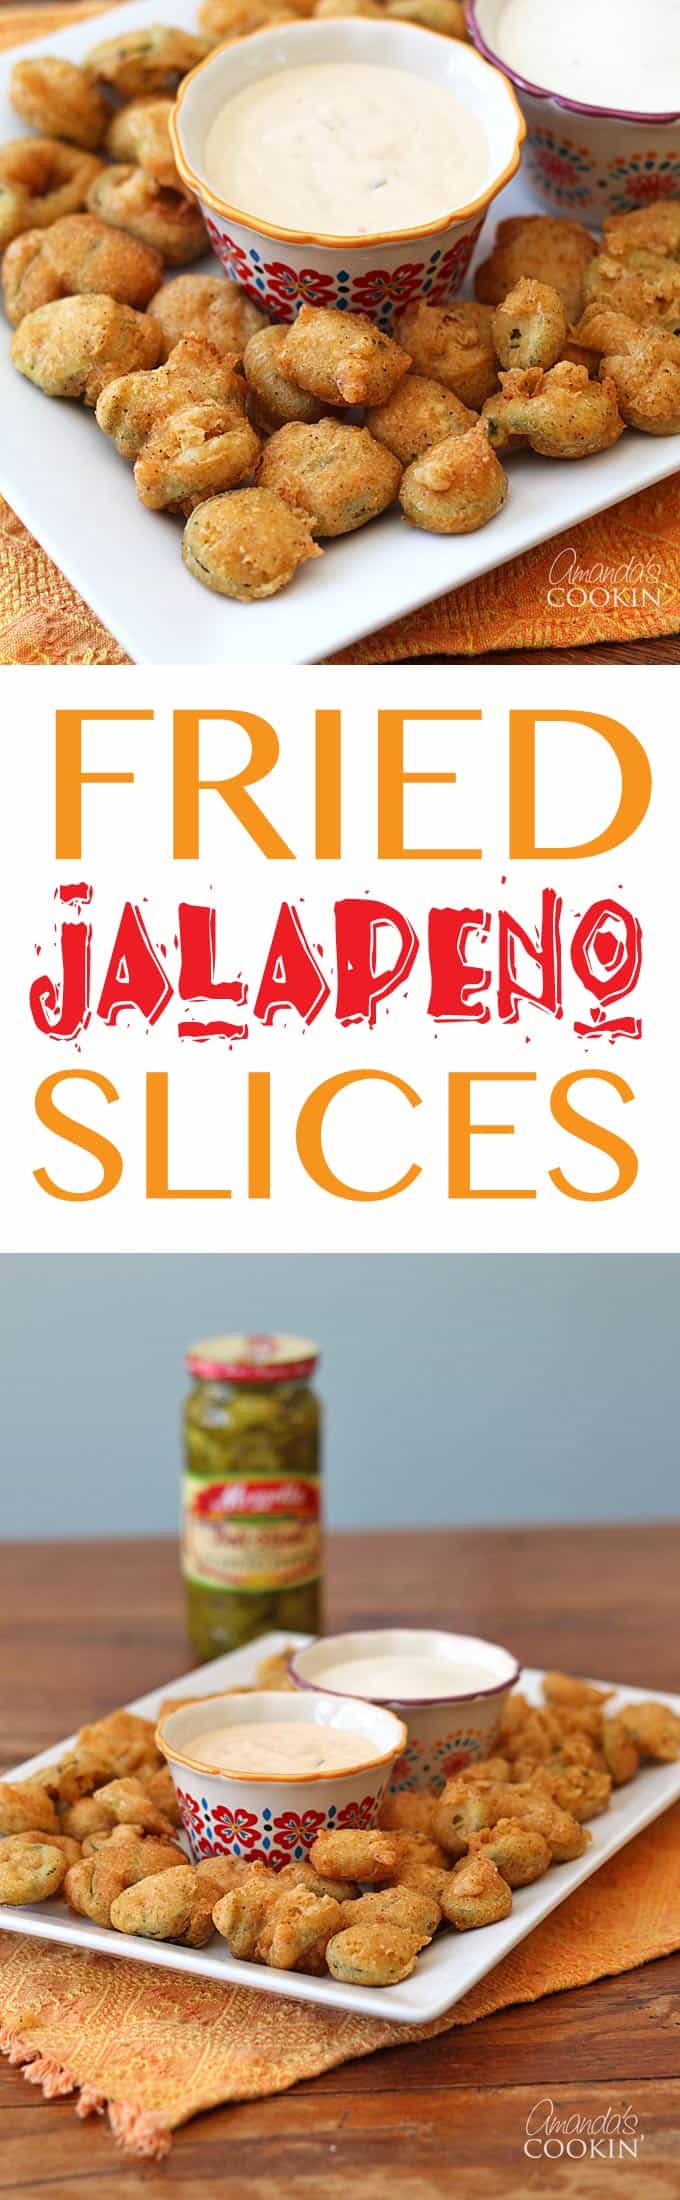 Photos of a plate of crispy fried jalapeno slices.